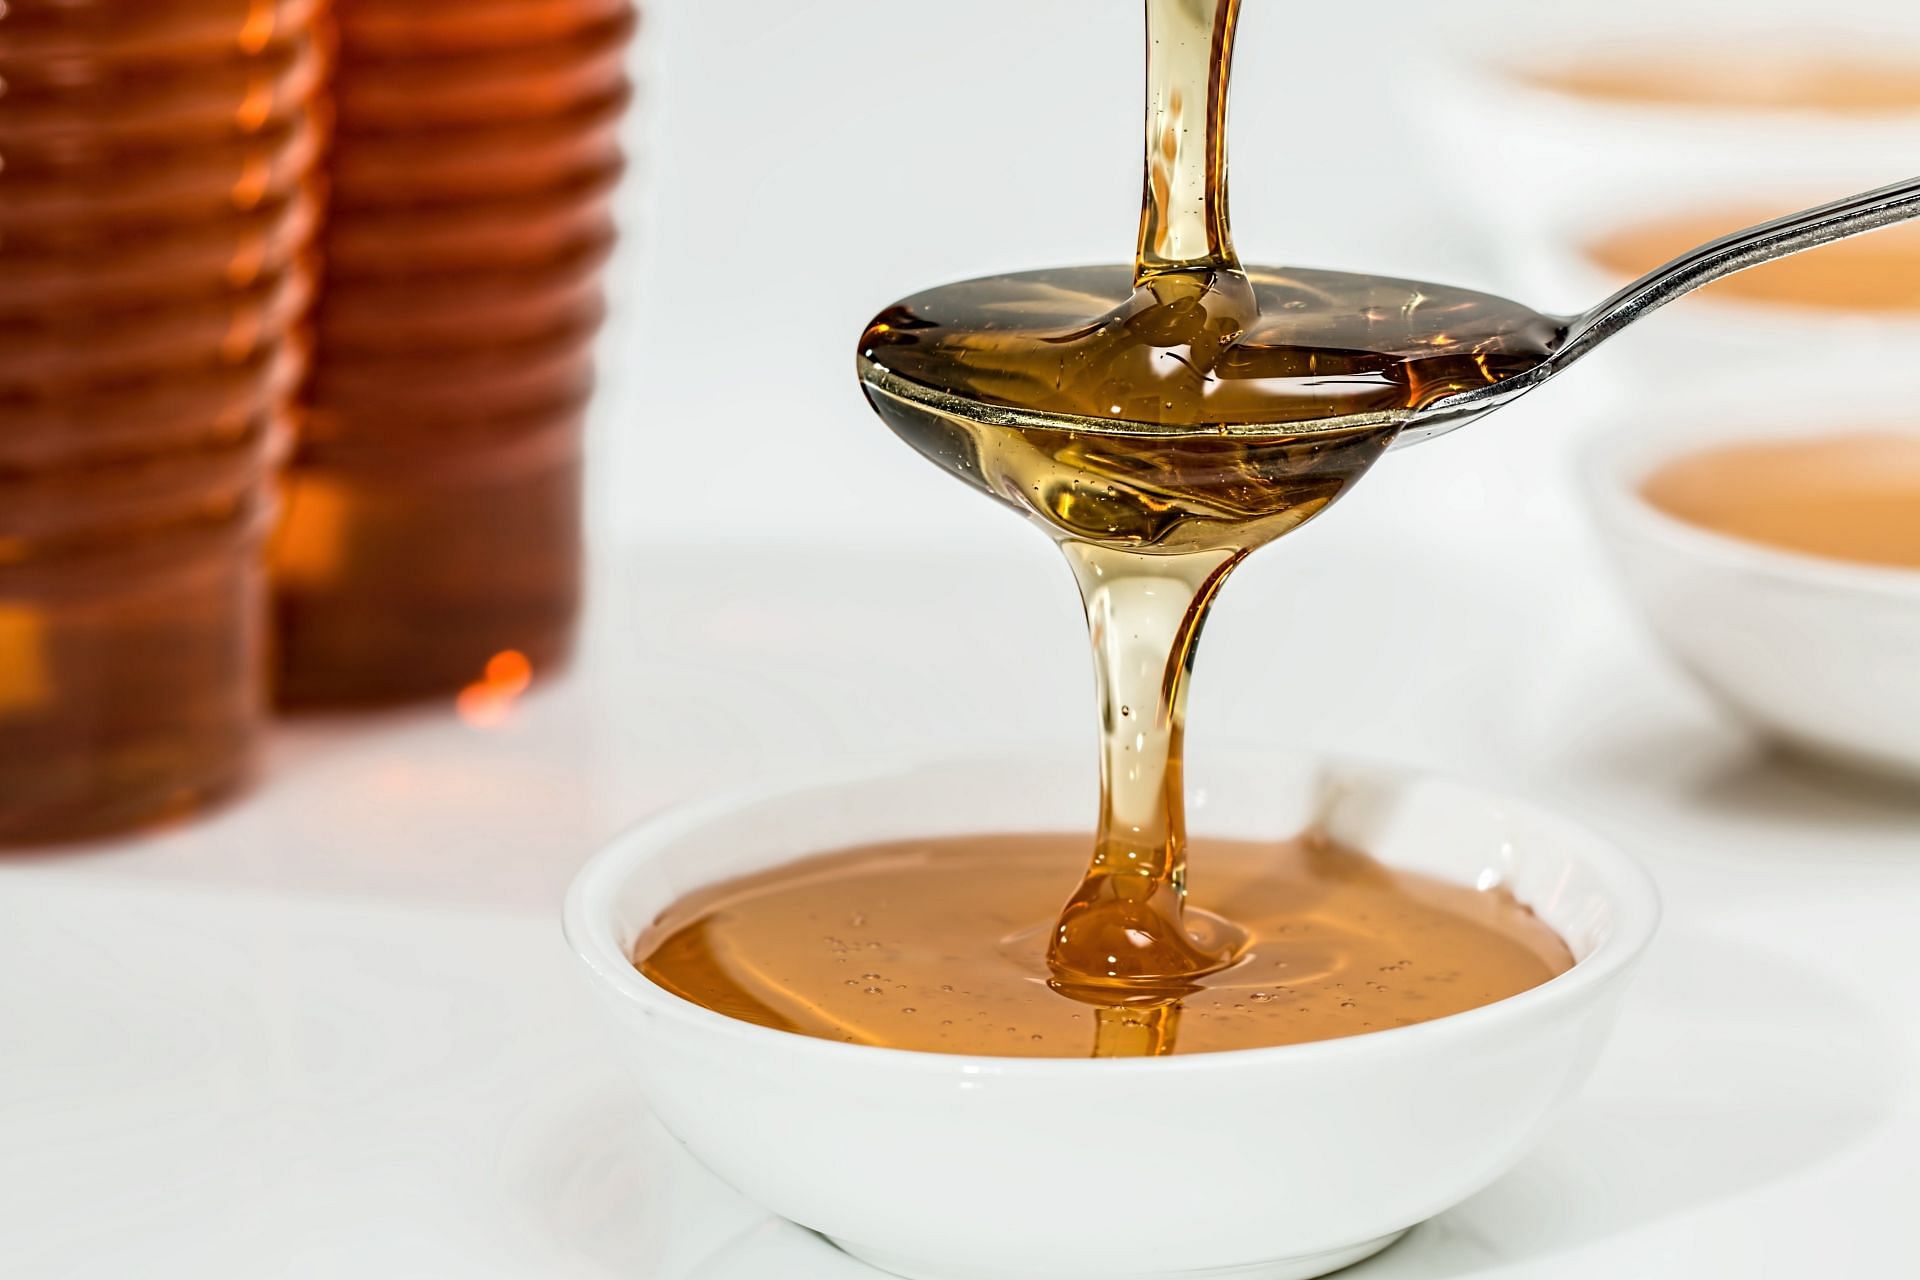 Benefits of honey for women (Image sourced via Pexels / Photo by pixabay)